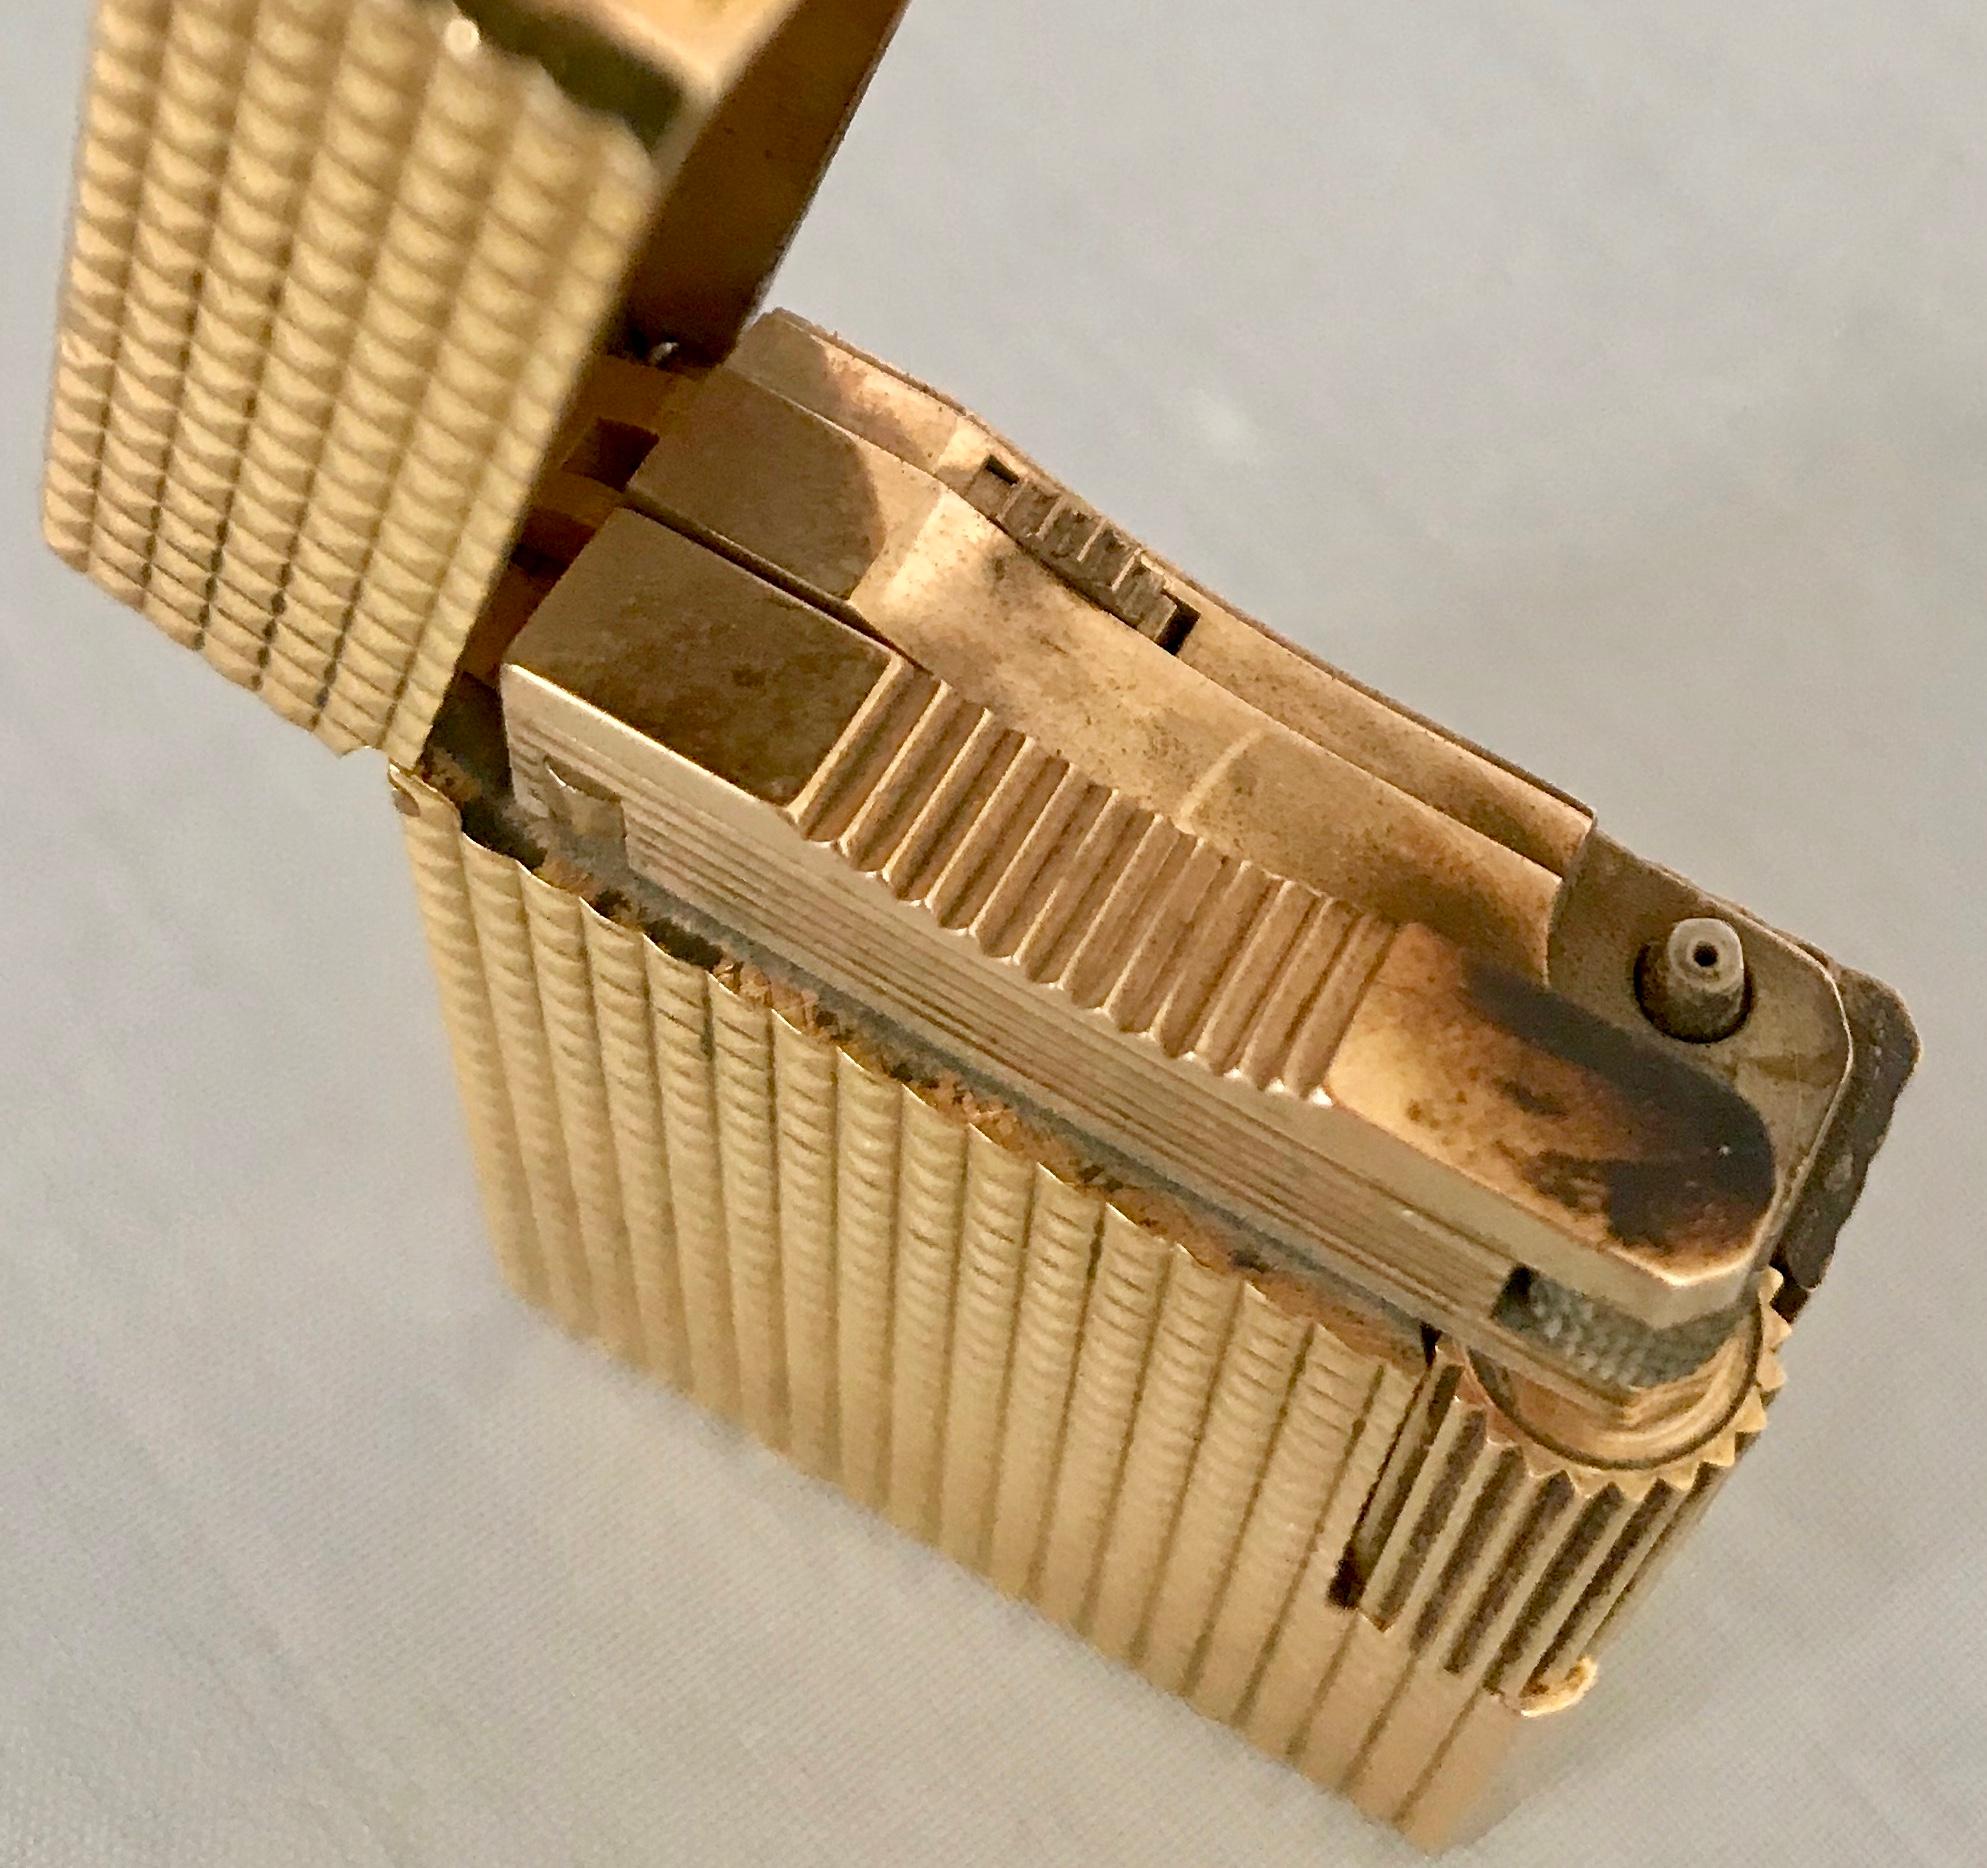 20th Century Vintage Gold-Plated Diamond Head Pocket Gas Lighter By S. T. Dupont, Paris